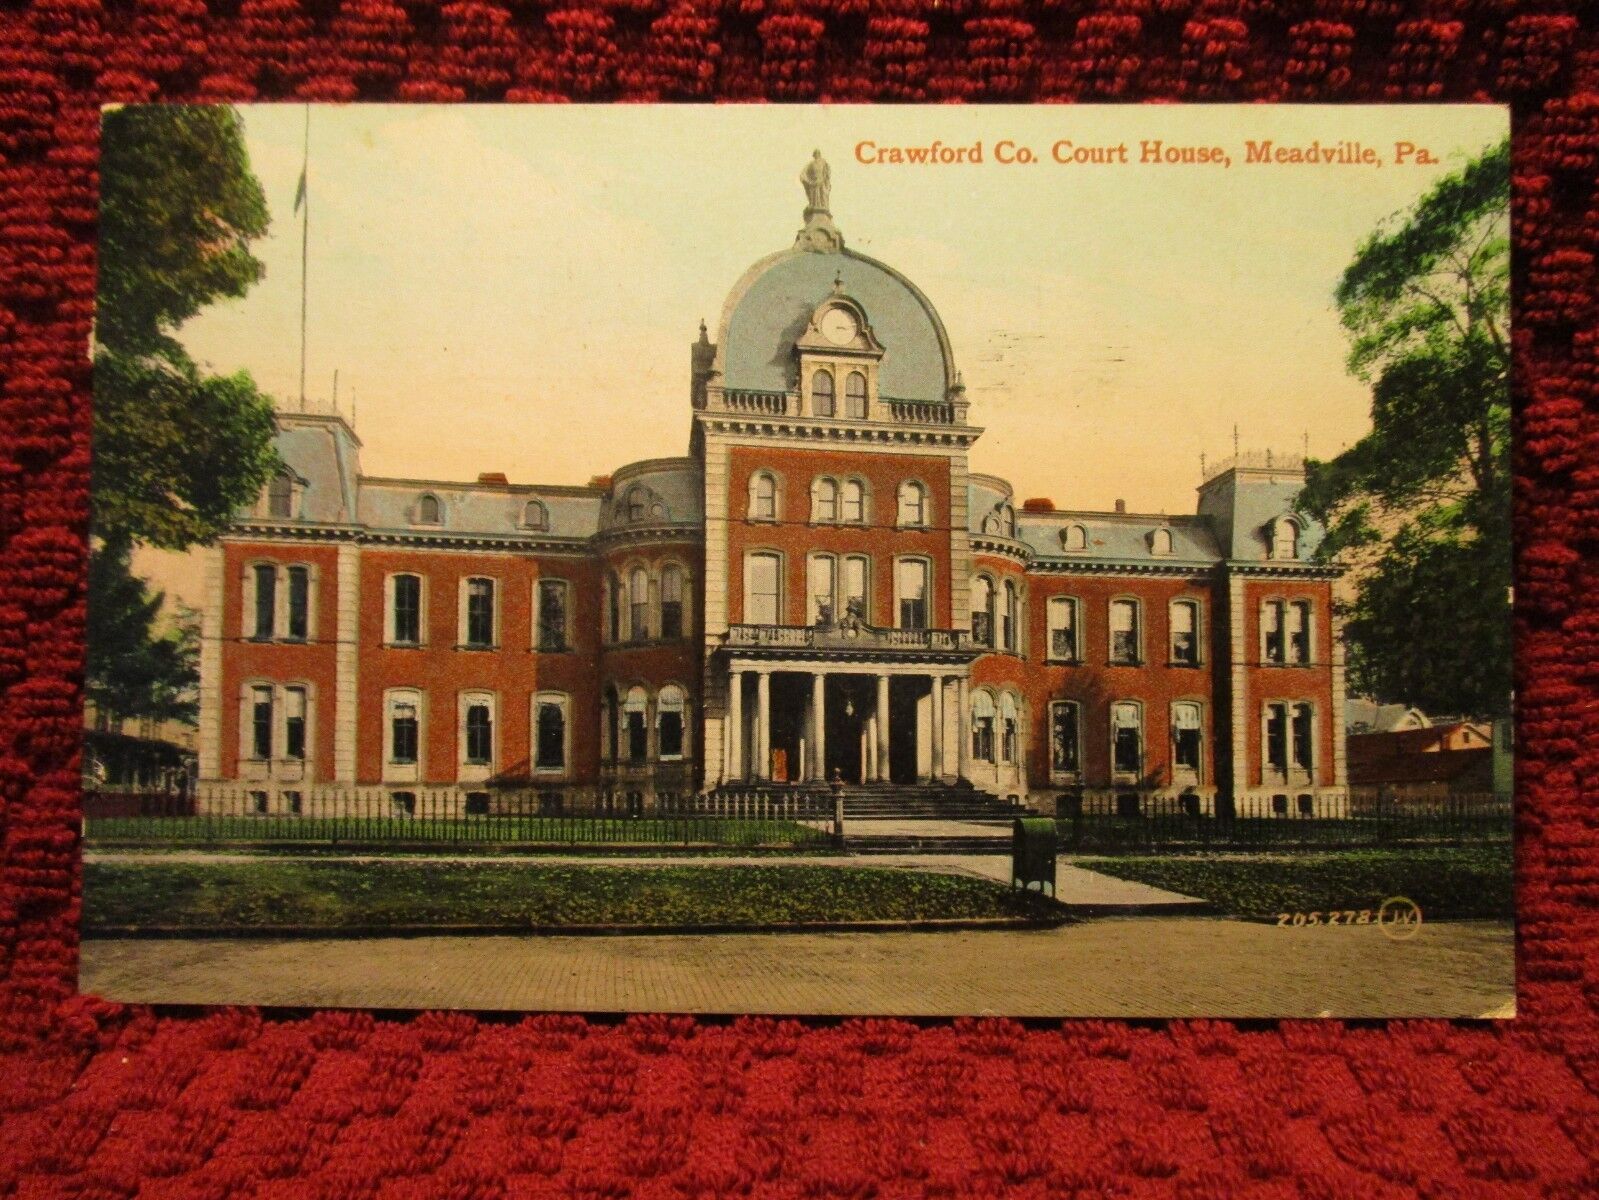 1910. CRAWFORD CO. COURT HOUSE. MEADVILLE, PA. POSTCARD L10